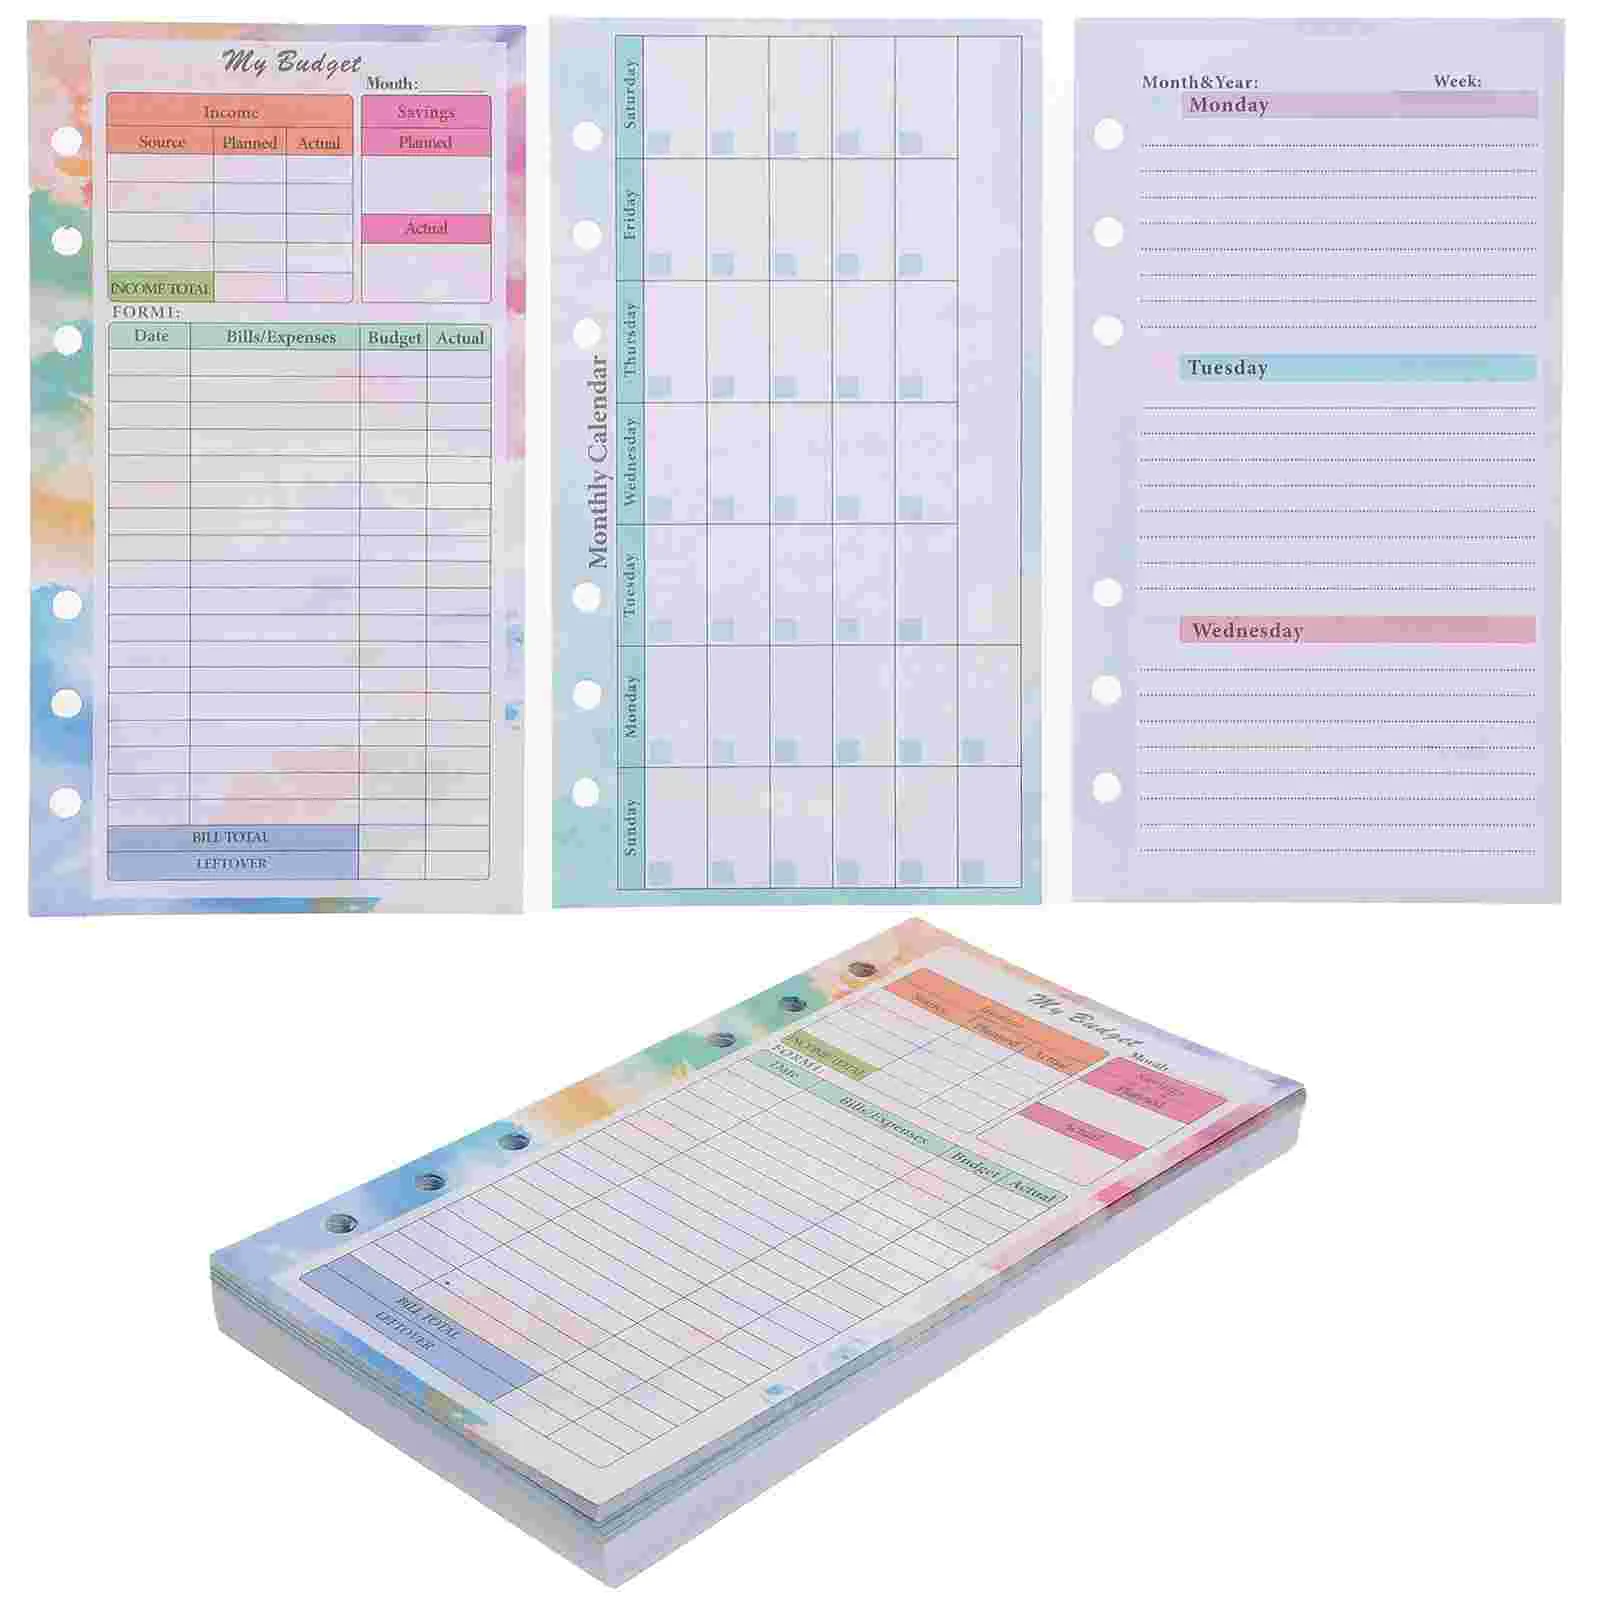 

Bulk Notebooks Budget Refills Plan Expense Tracking Papers Planning Hand Account Money Recording Notepad Decorative Portable